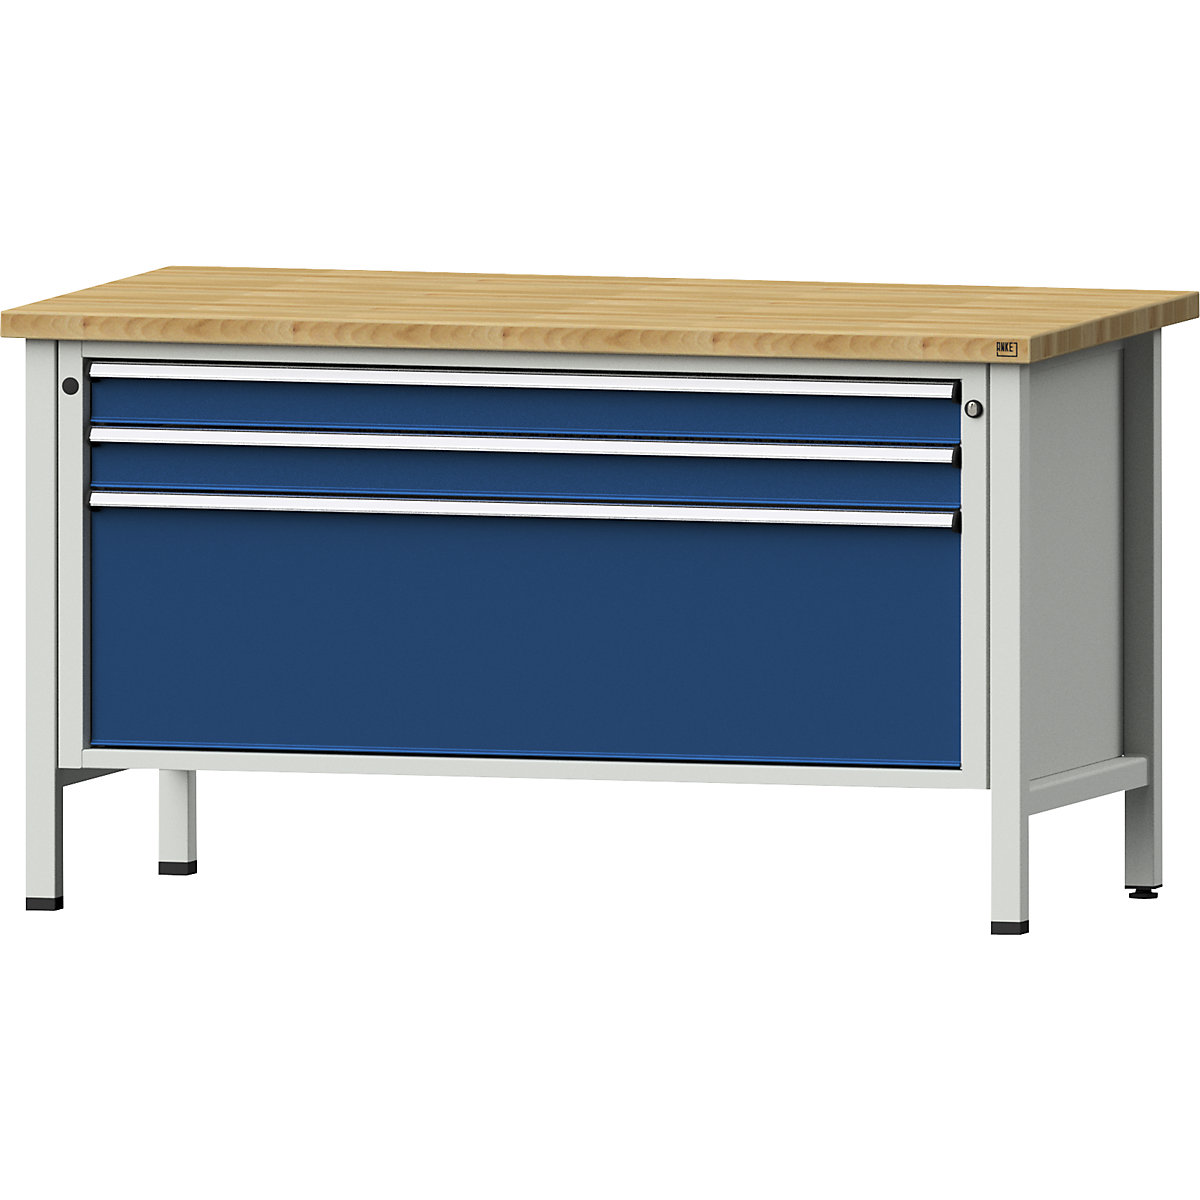 Workbench with XL/XXL drawers, frame construction – ANKE, width 1500 mm, 3 drawers, solid beech worktop, front in gentian blue-11